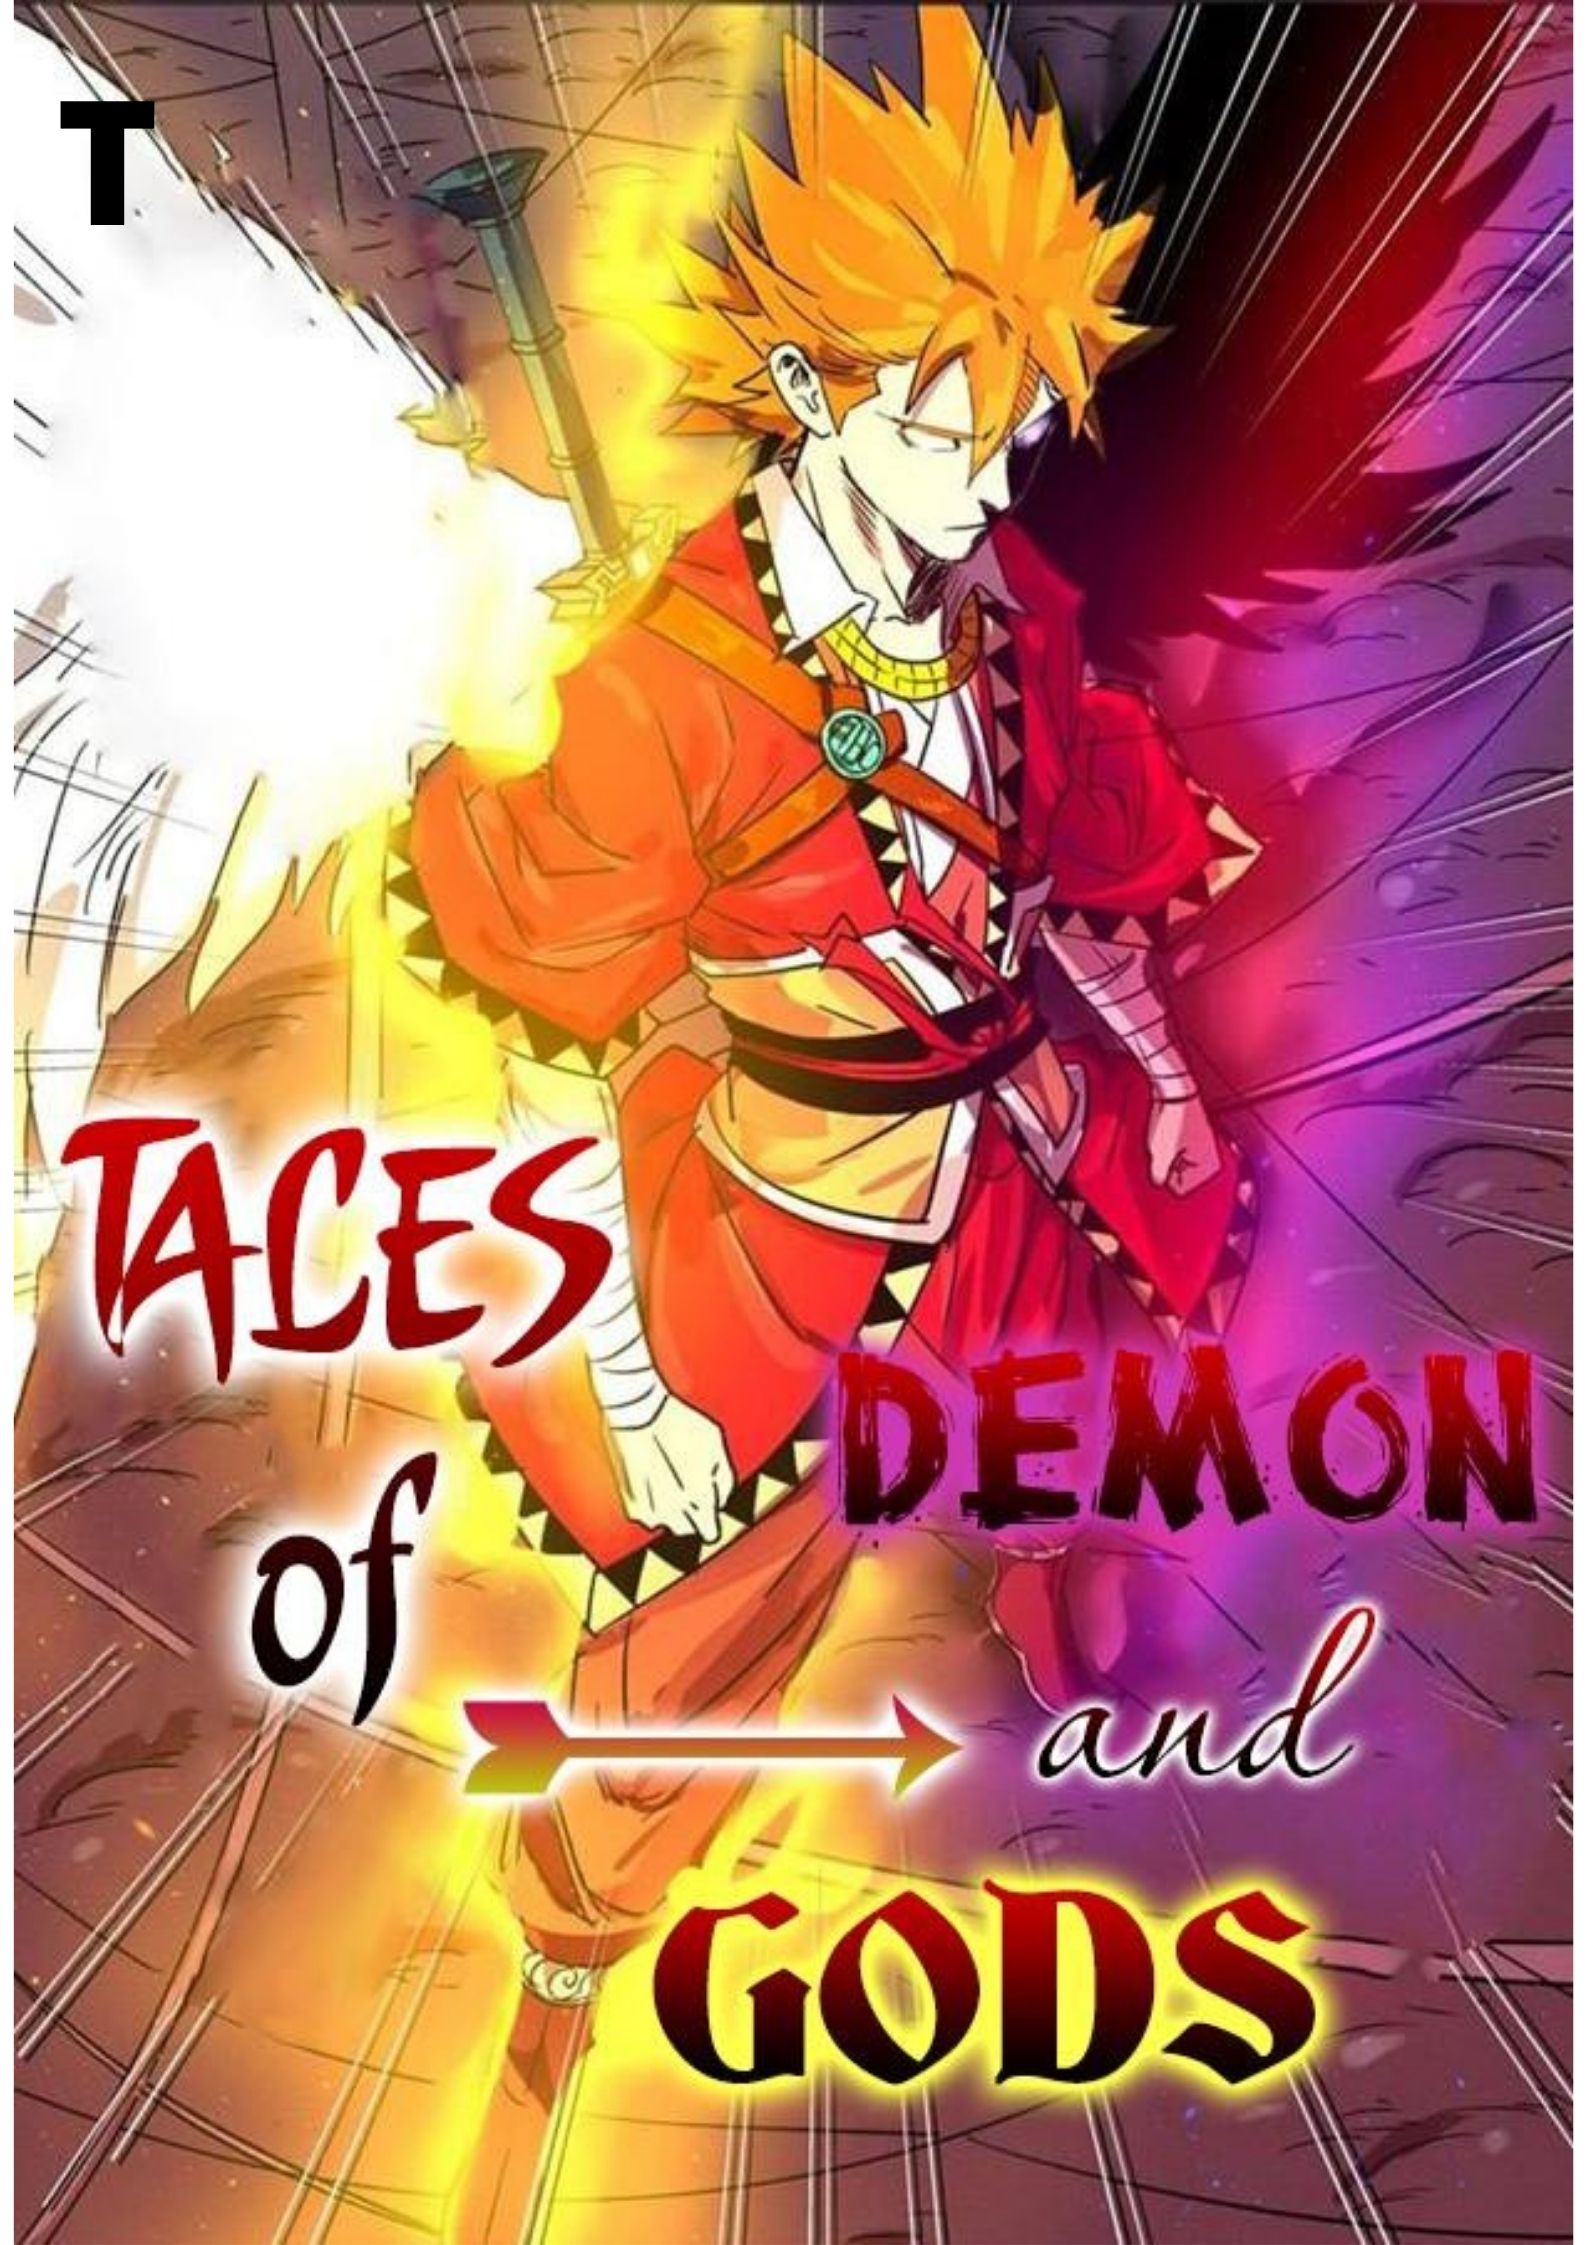 Tales Of Demons And Gods Chapter 354 Release Date